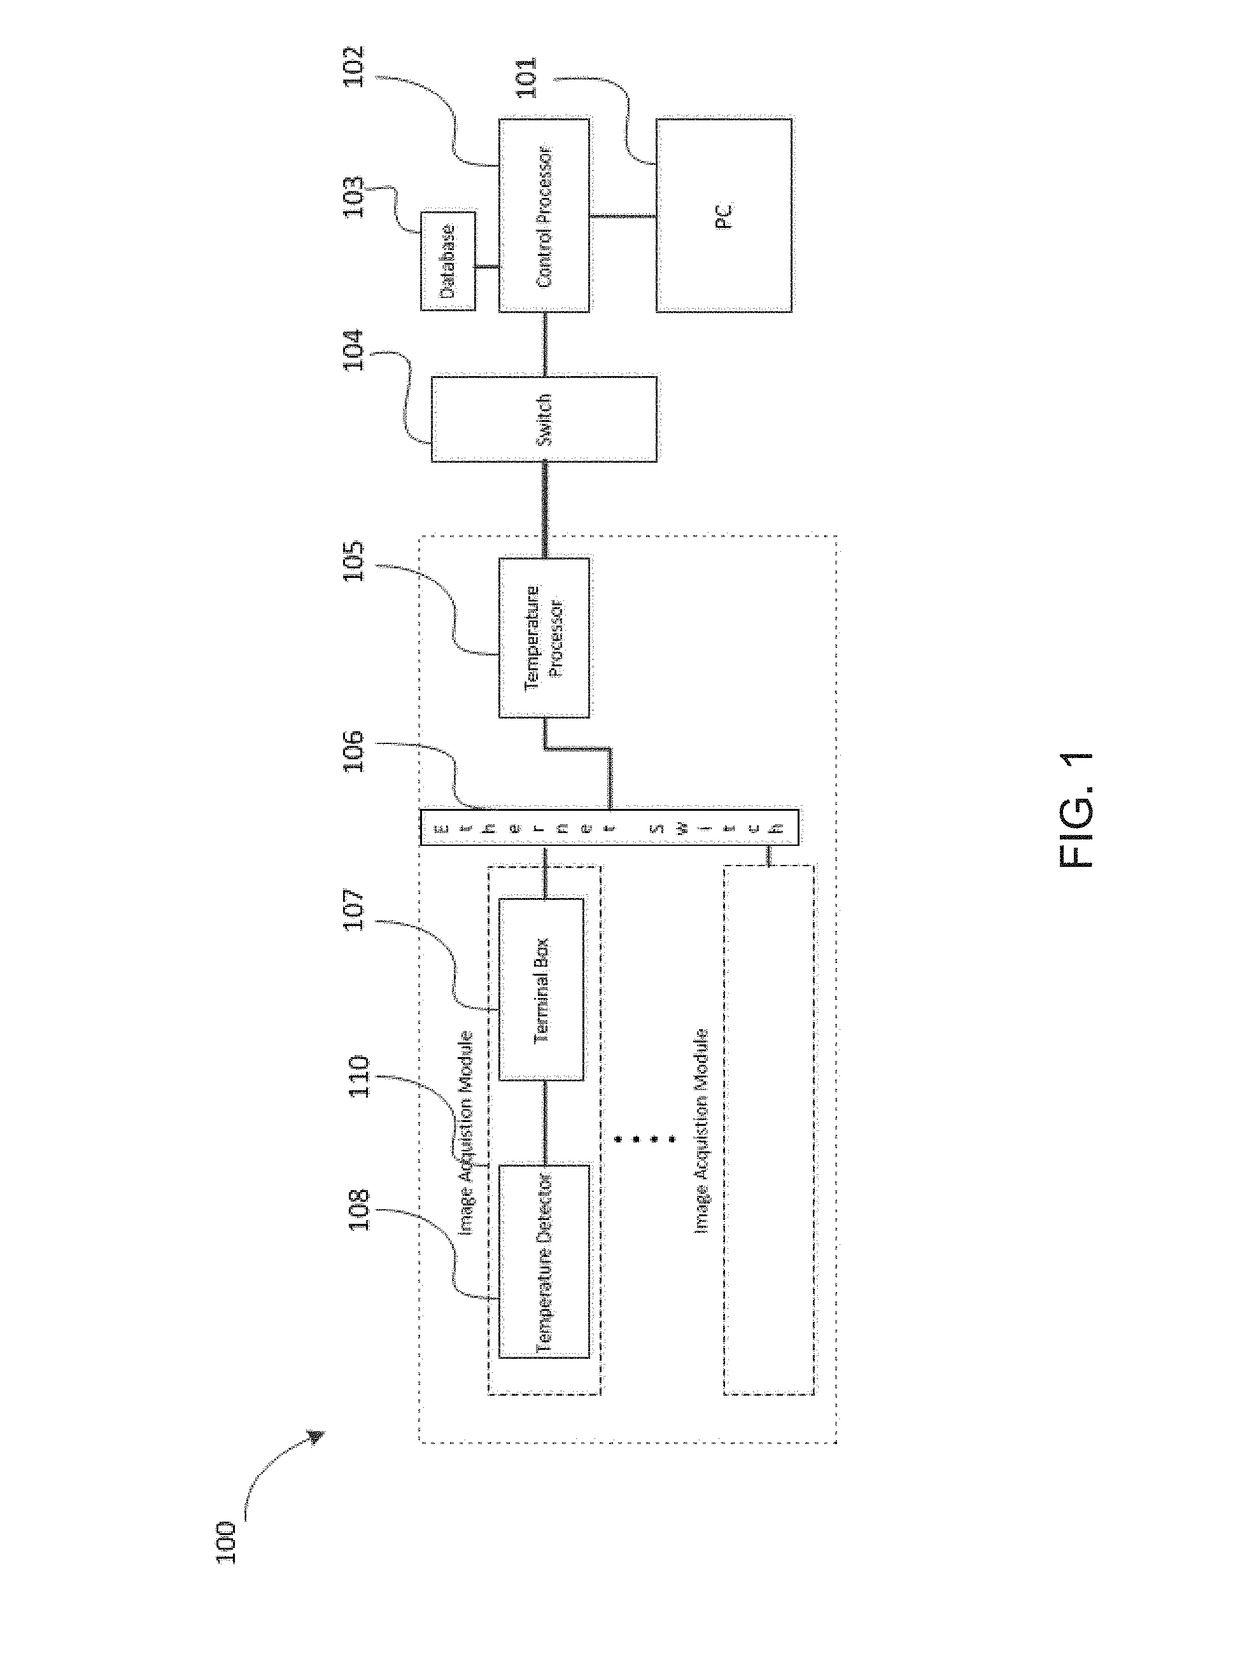 System and Method for Measuring Coal Burner Flame Temperature Profile Using Optical Device